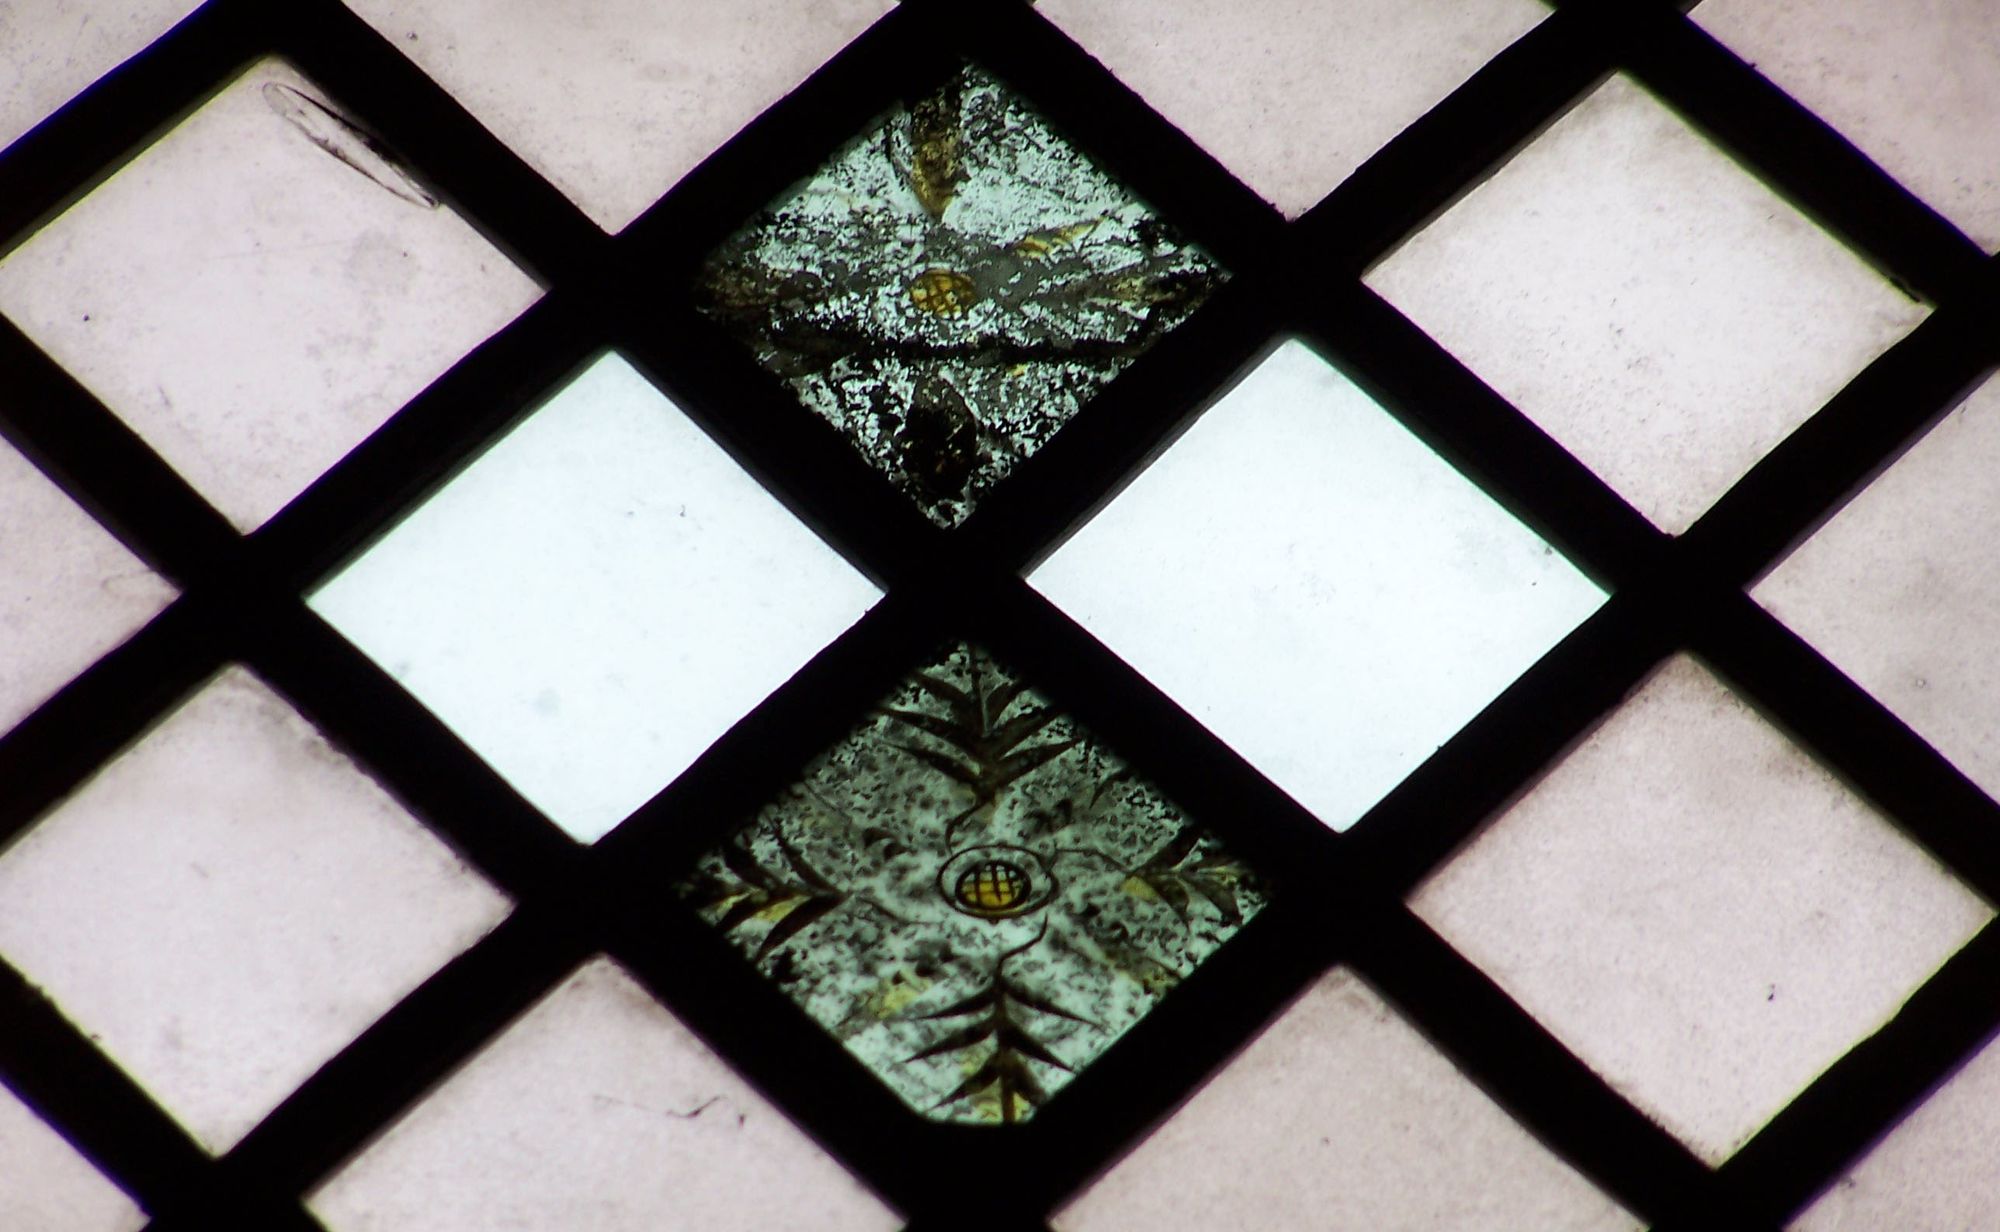 Medieval glass fragments in the vestry windows.